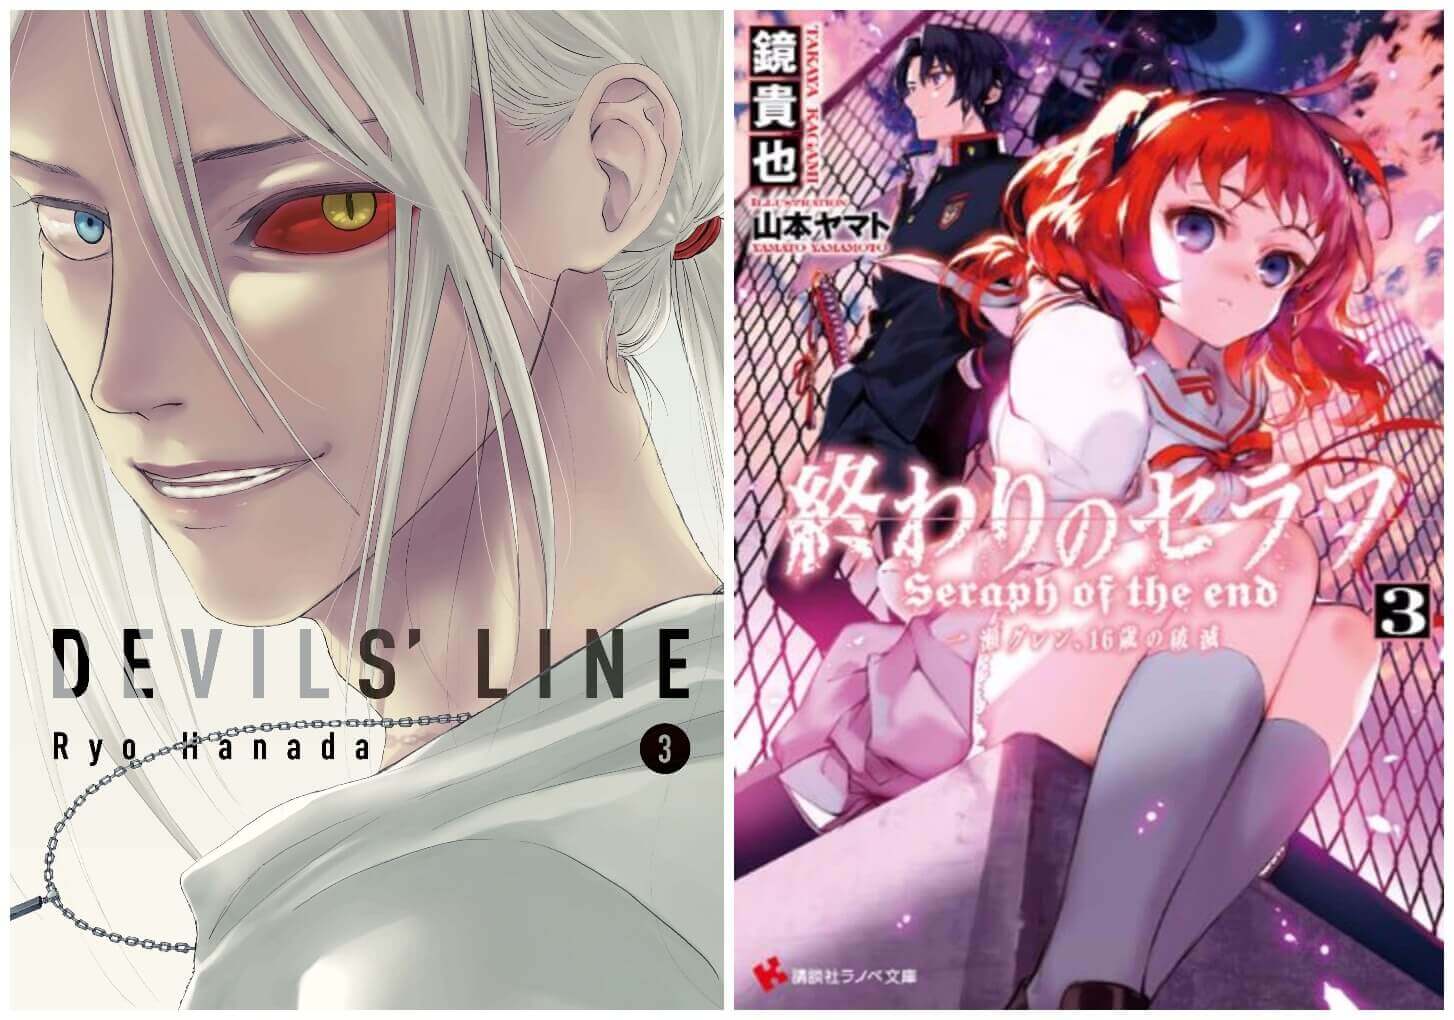 September 2016 Manga Releases Covers for Devils' Line and Seraph of the End Novel.